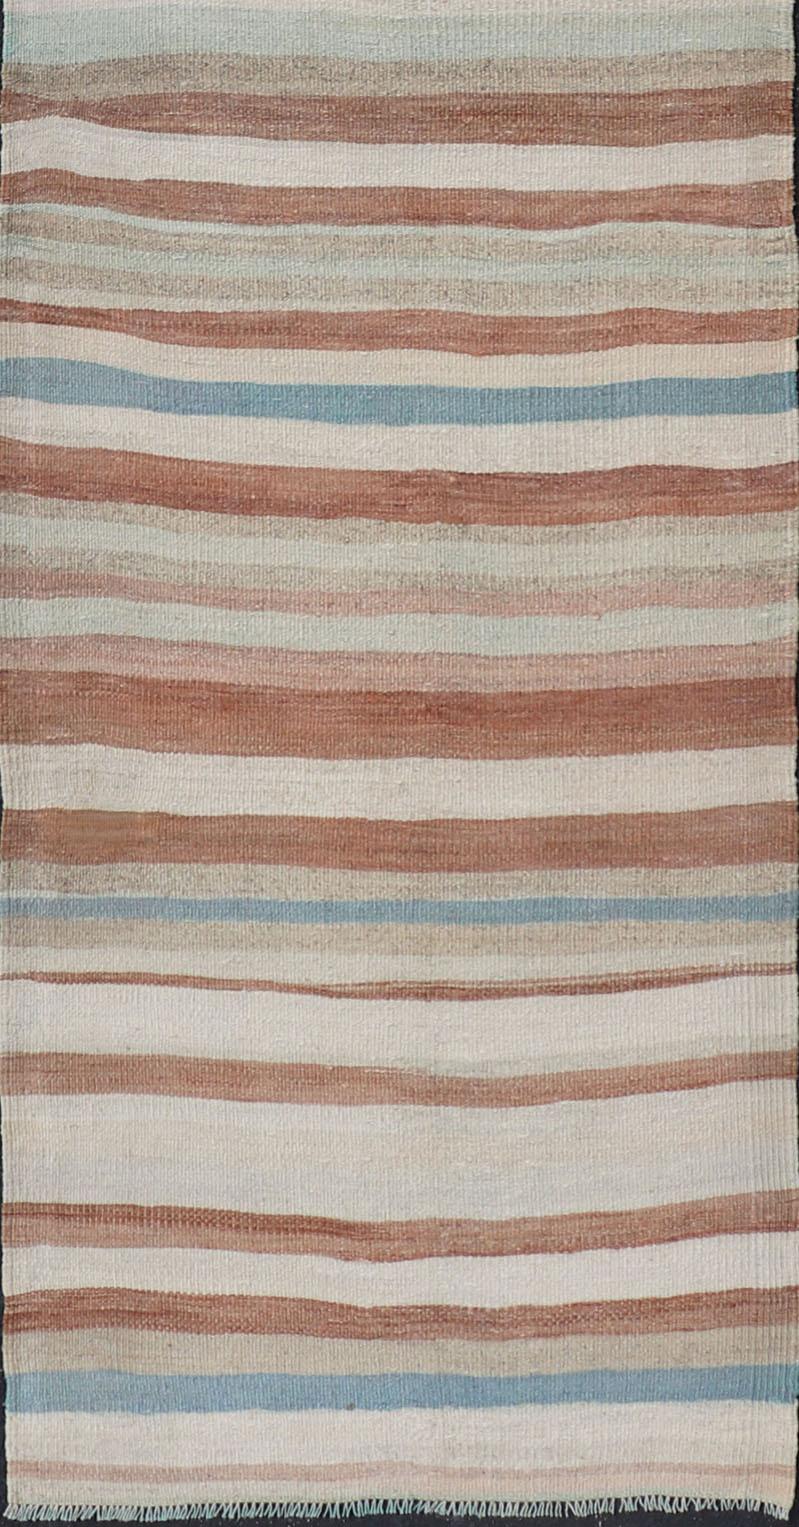 Striped Vintage Turkish Kilim Runner in Shades of Brown, Cream, and Blue In Good Condition For Sale In Atlanta, GA